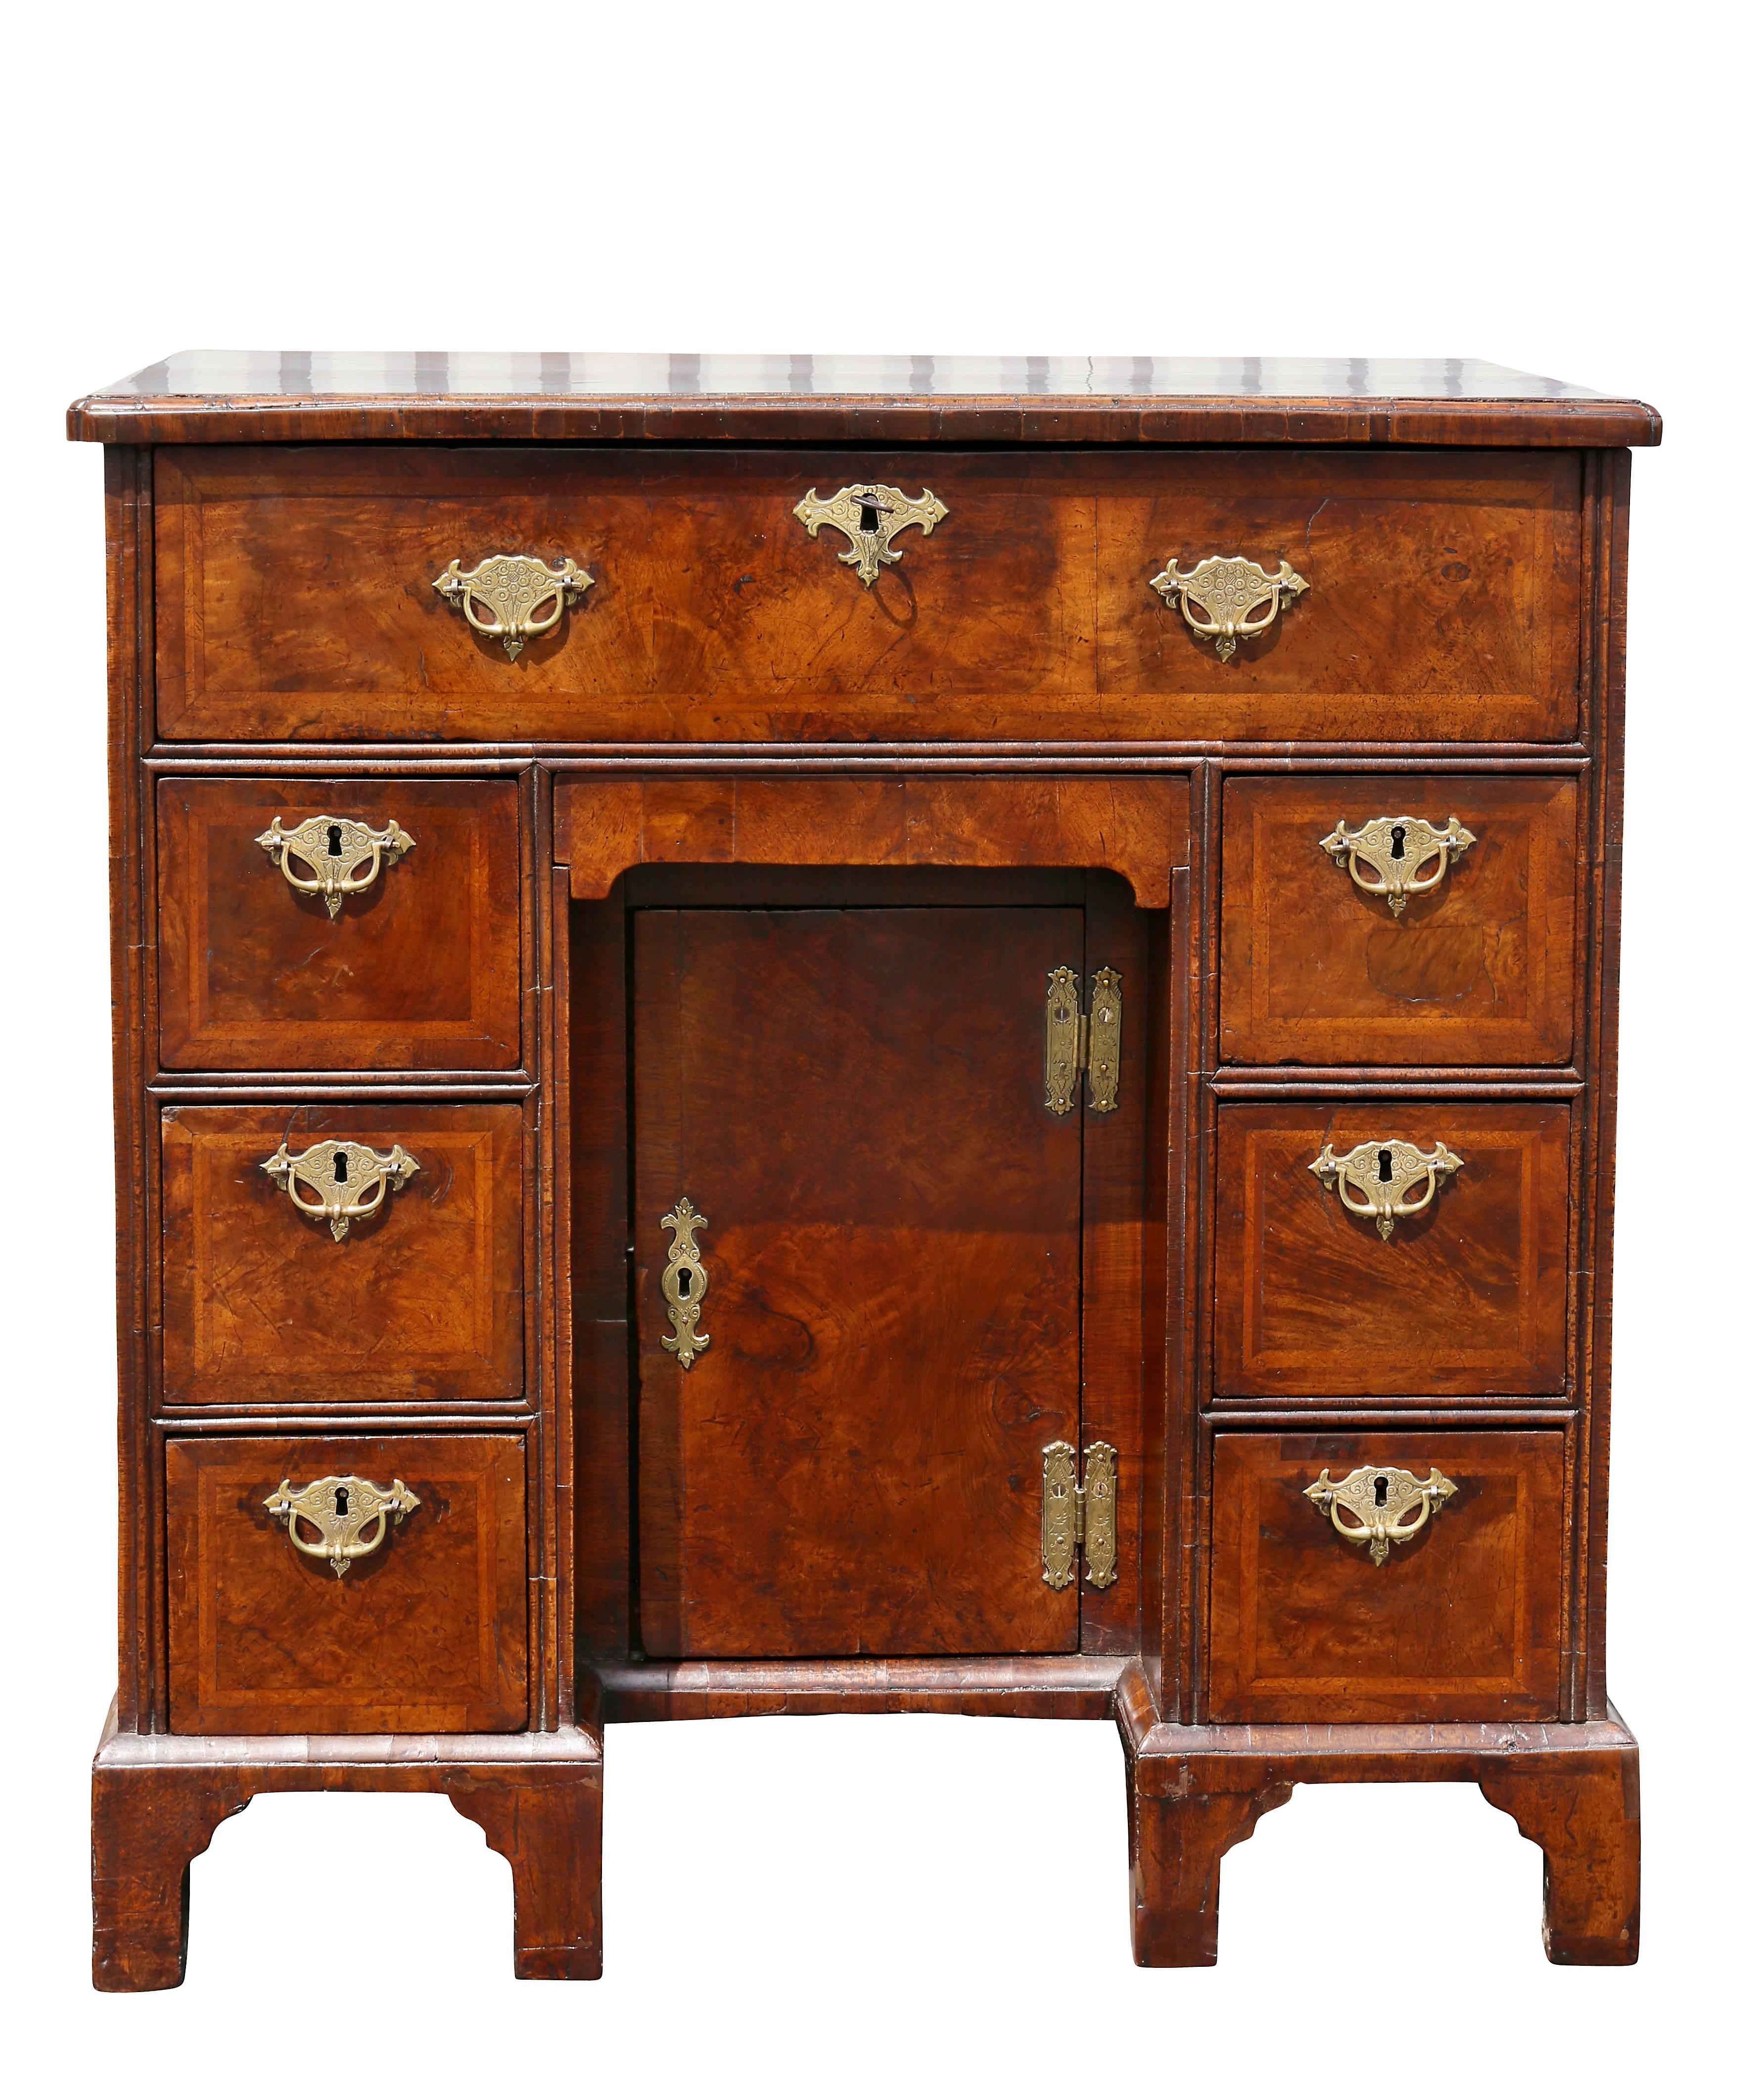 Nicely figured walnut, rectangular quarter veneer top over top over a drawer and kneehole with door and small drawer flanked by drawers raised on bracket feet.